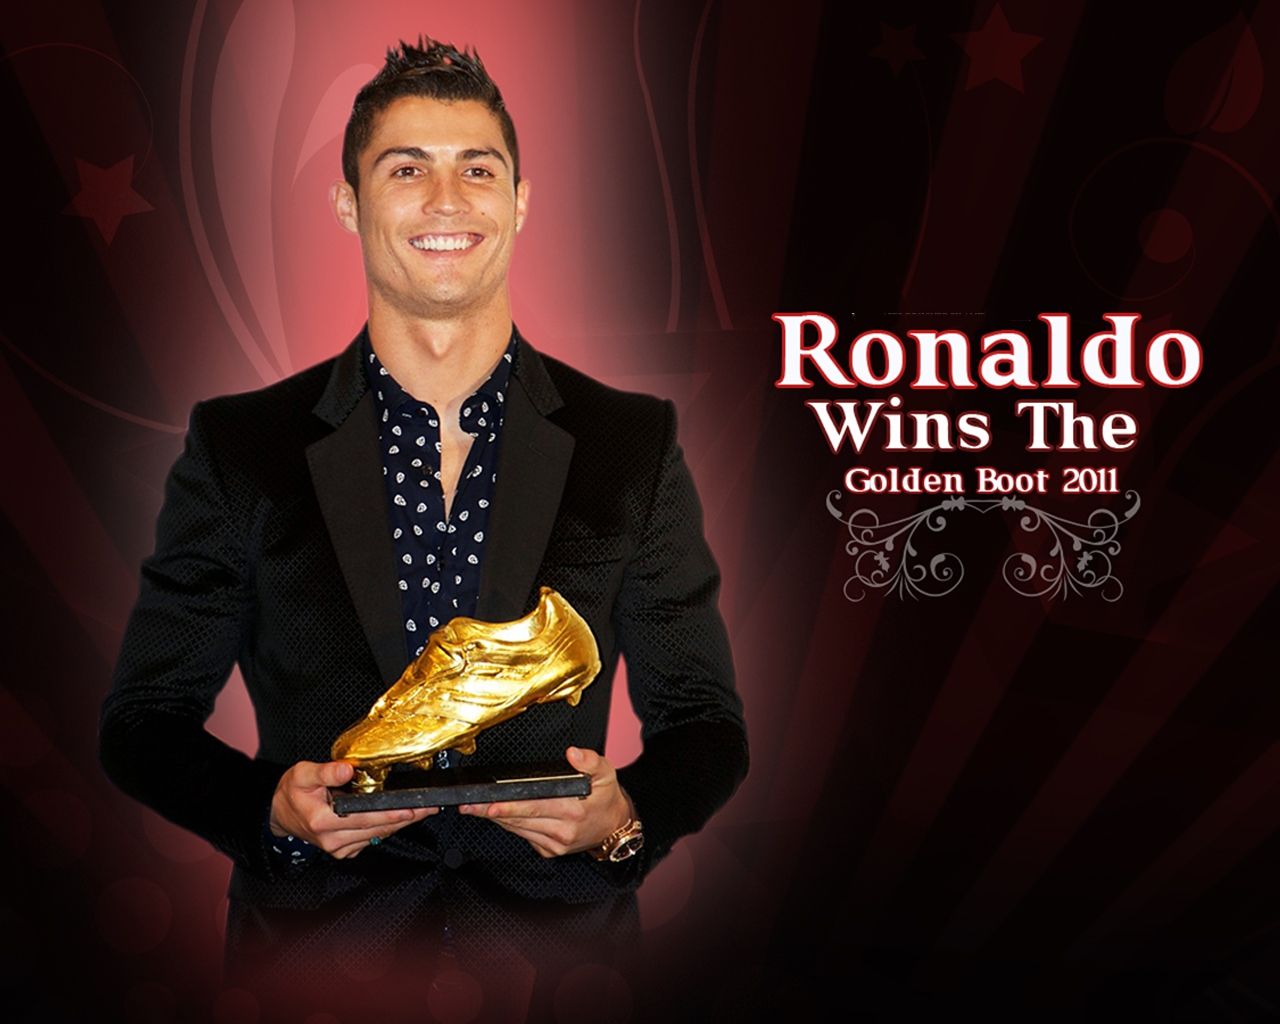 Free download CR7 Wallpaper 309 New collection of cr7 wallpaper 2015 [1280x1024] for your Desktop, Mobile & Tablet. Explore CR7 HD Wallpaper 2015. CR7 Wallpaper Ronaldo HD Wallpaper, CR7 HD Wallpaper 2014